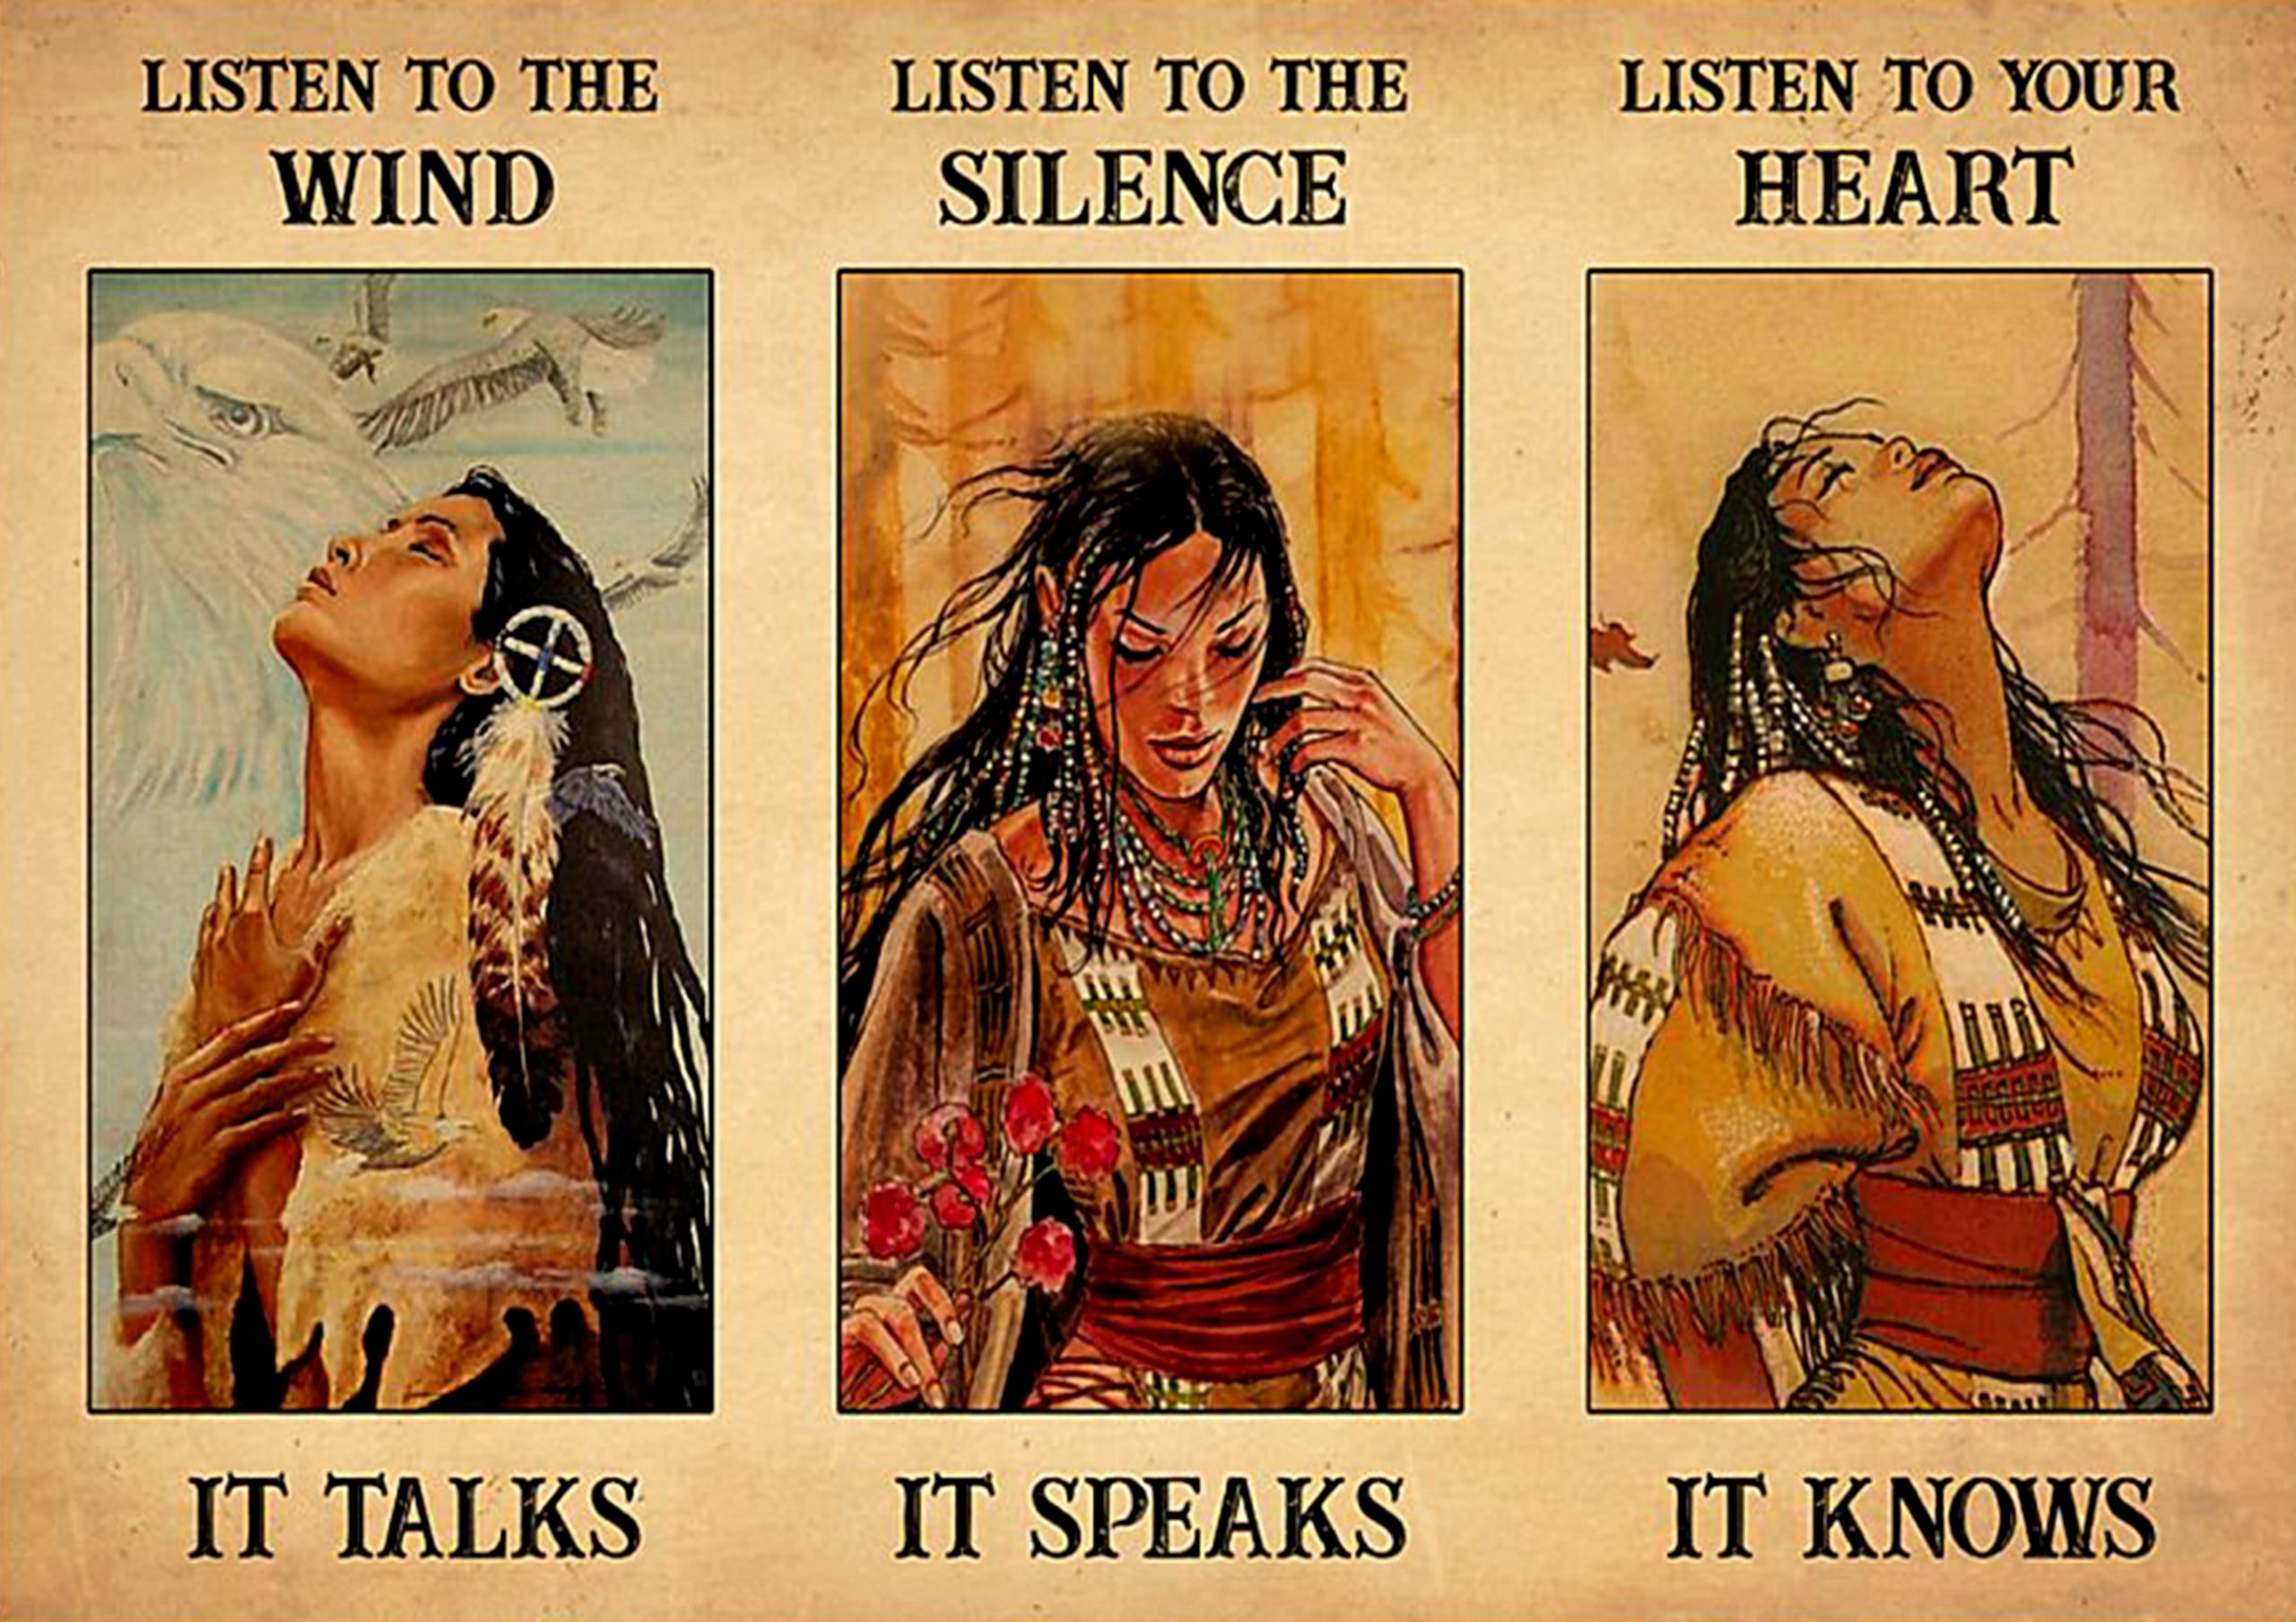 vintage native american girls listen to the wind it talks listen to the silence it speaks poster 1 - Copy (3)